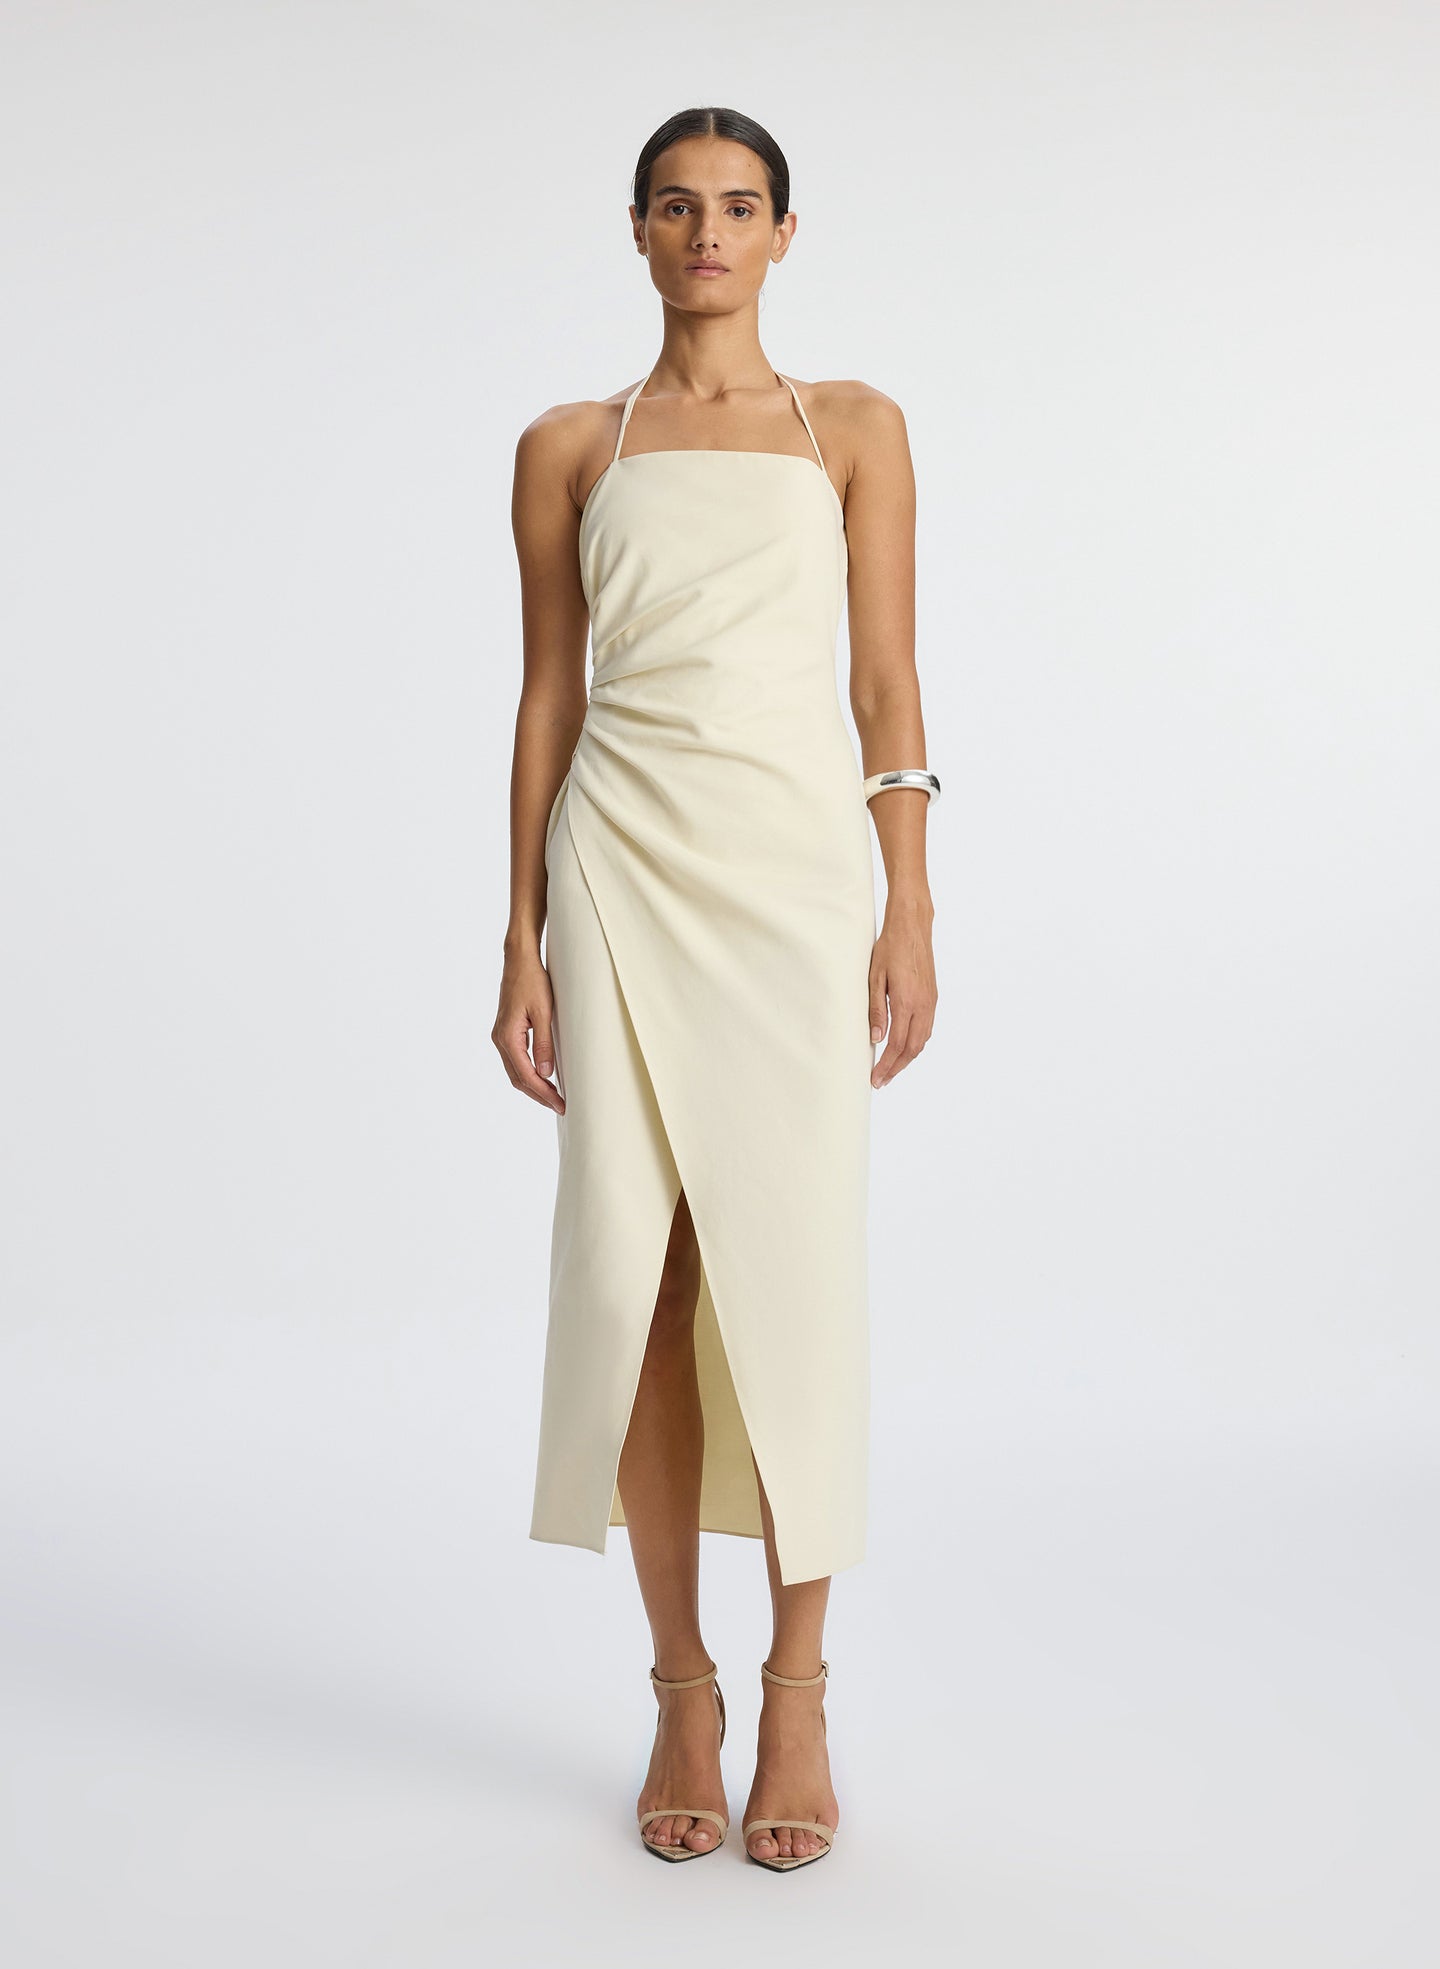 front view of woman wearing cream halter neckline ruched midi dress